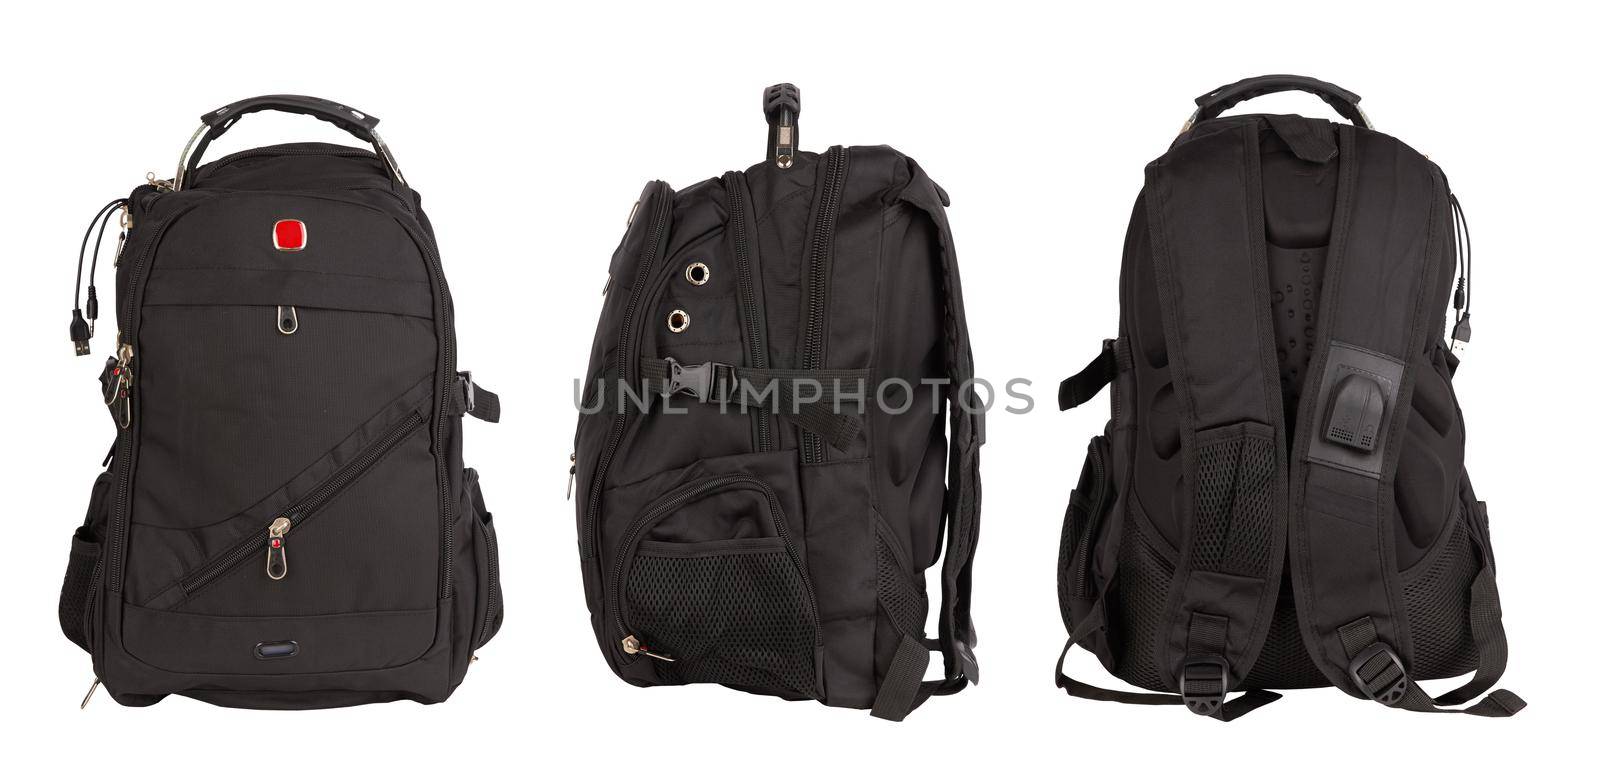 Big backpack for travel by pioneer111